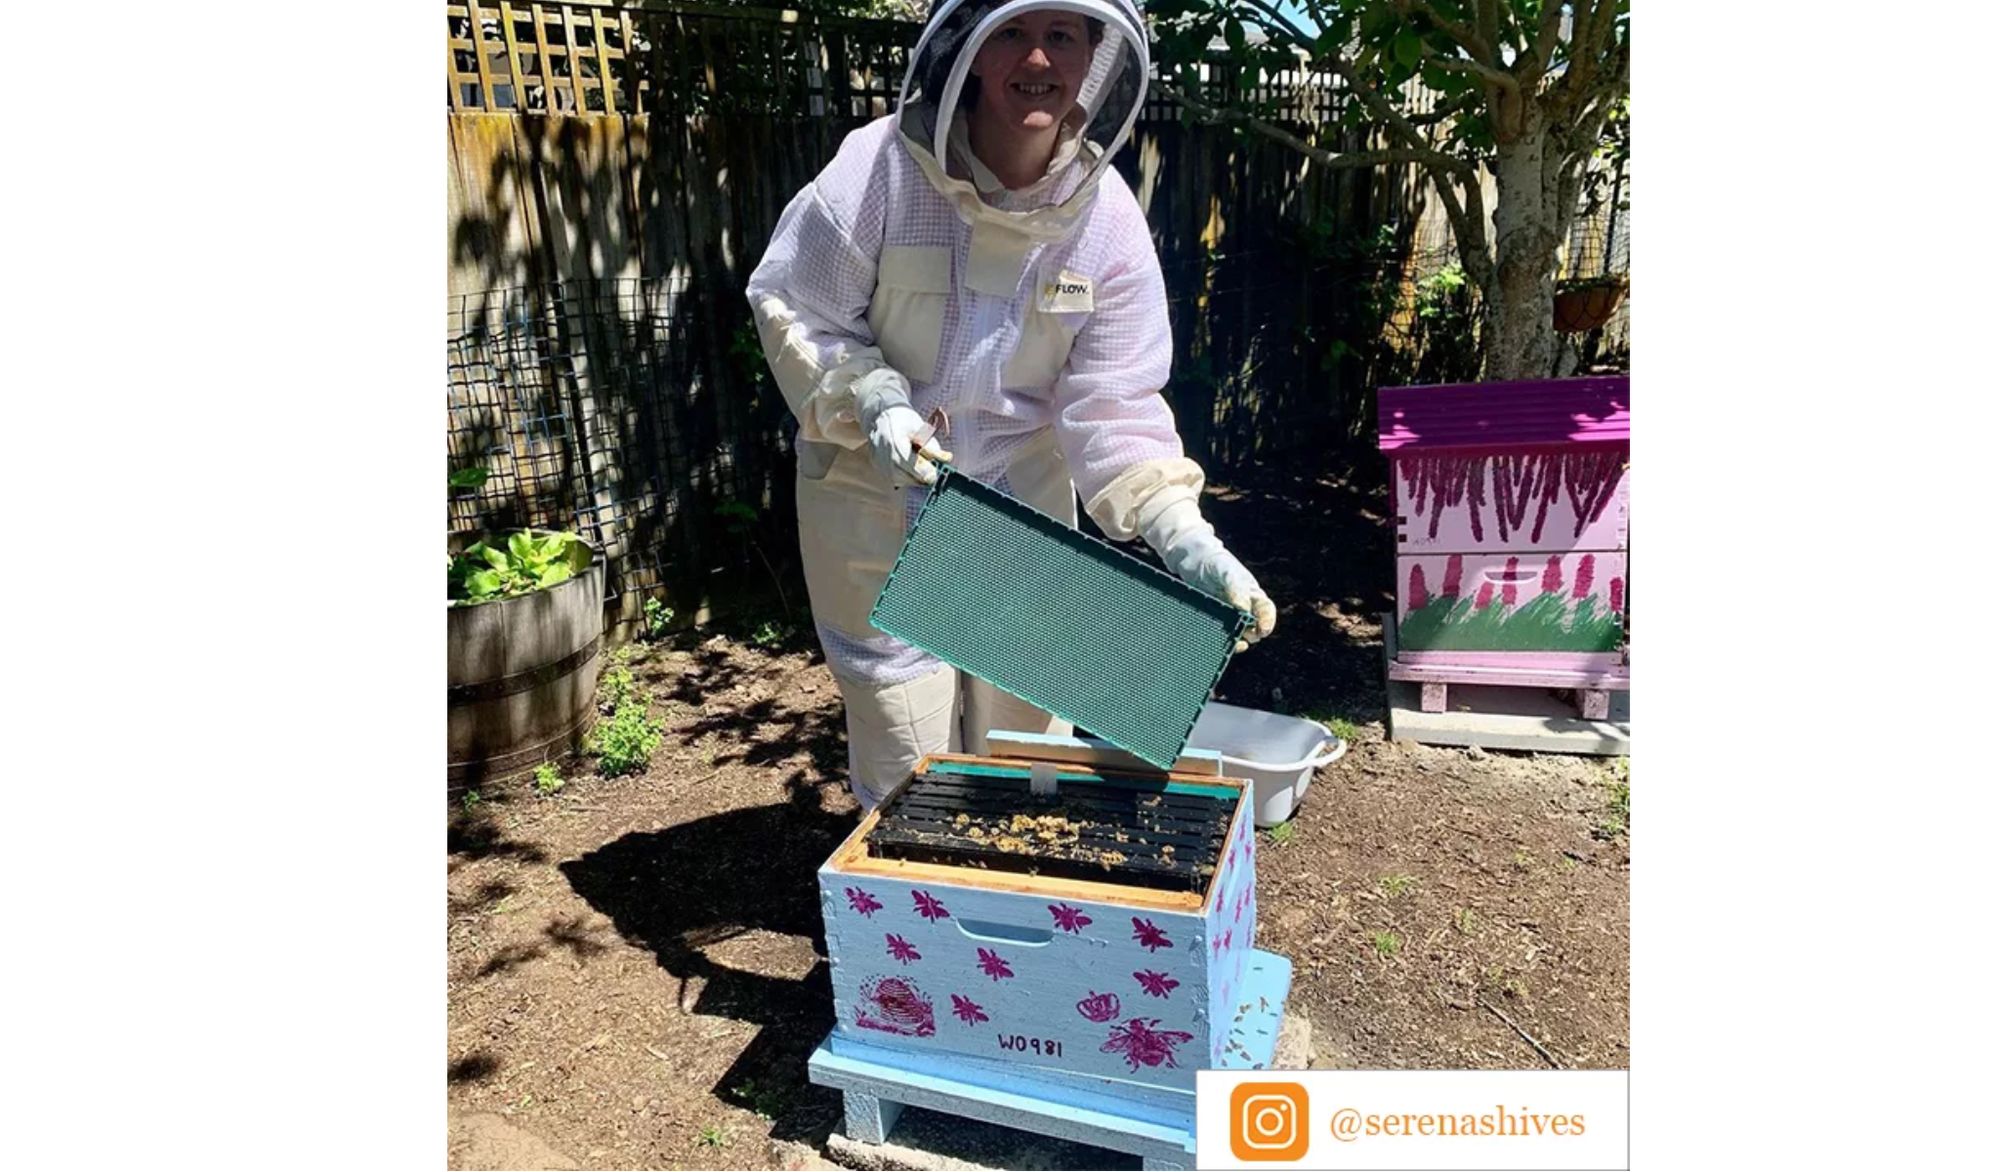 New Zealand Beeswax Ltd – Specialist beeswax processing and manufacturing  company situated in the South Island of New Zealand supplying industries  like beekeeping, cosmetic and pharmaceutical.